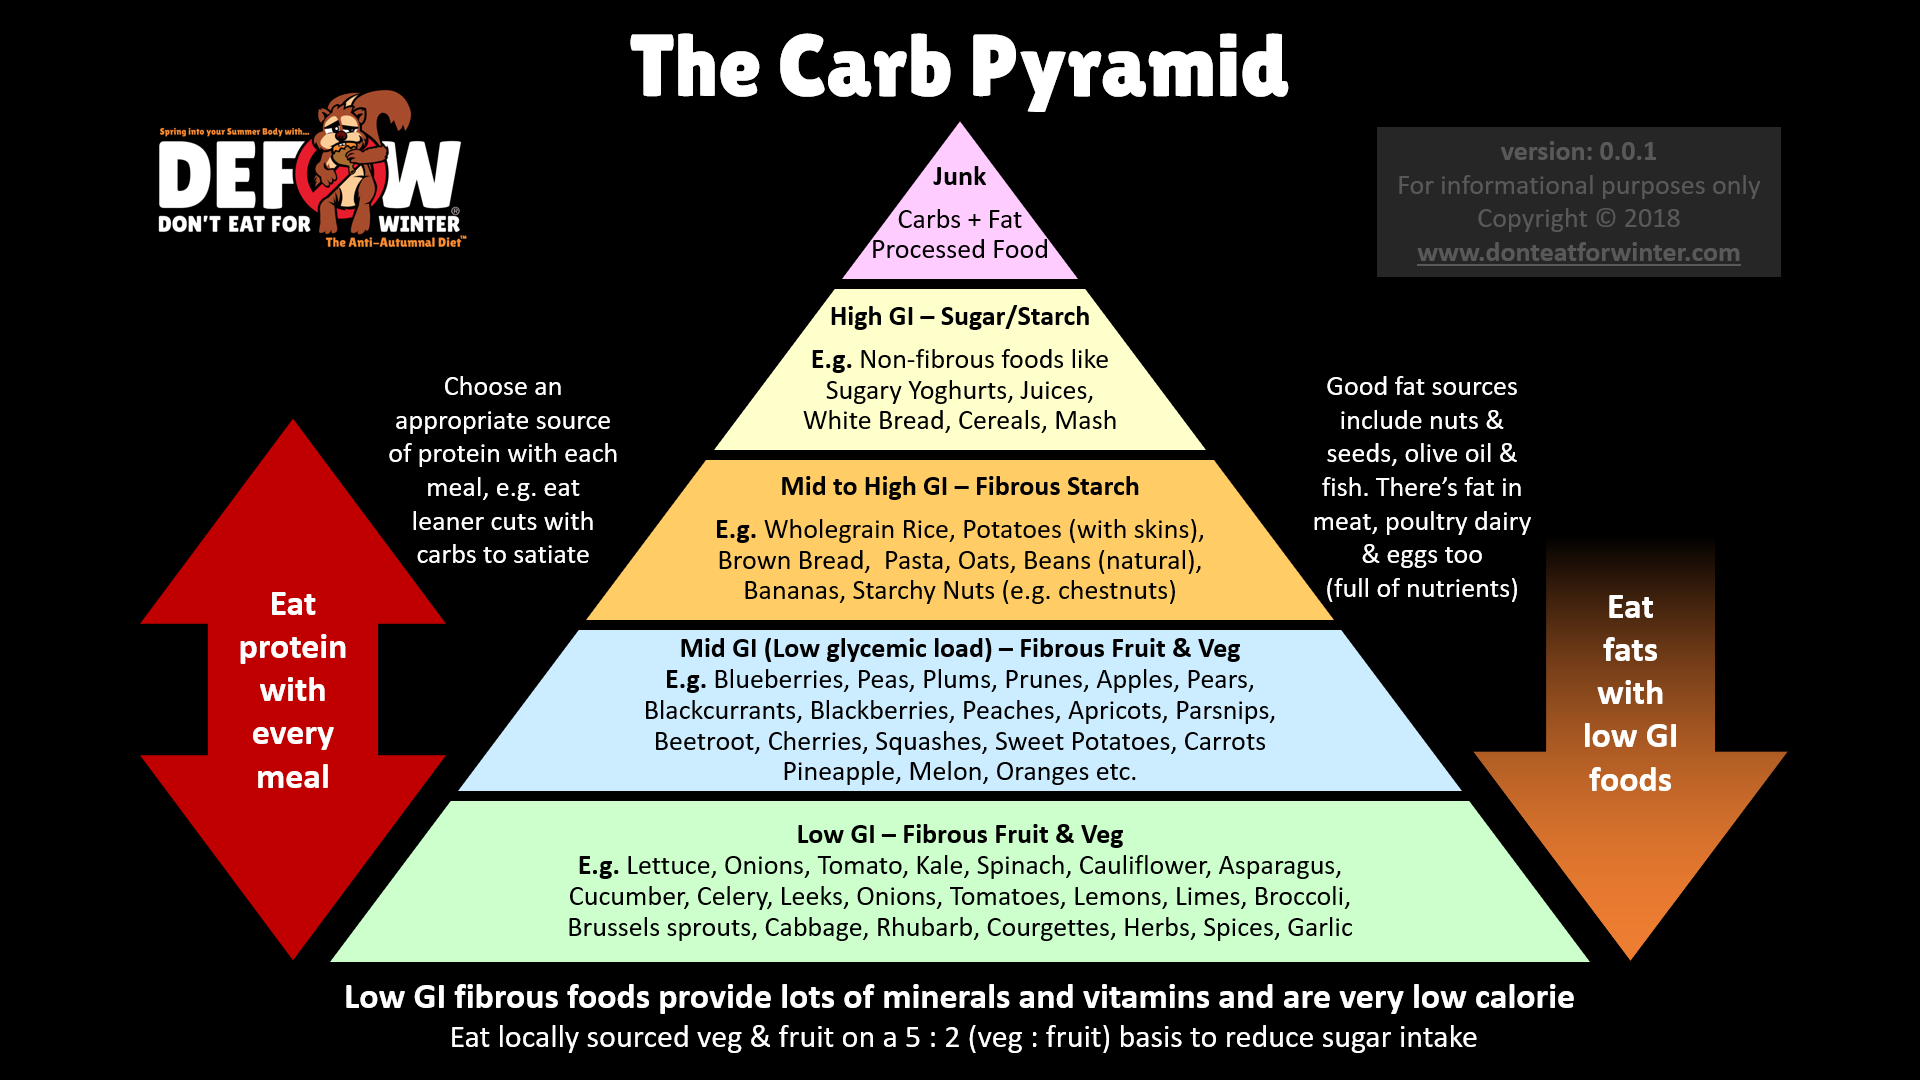 https://www.donteatforwinter.com/wp-content/uploads/2018/10/carb-pyramid.png